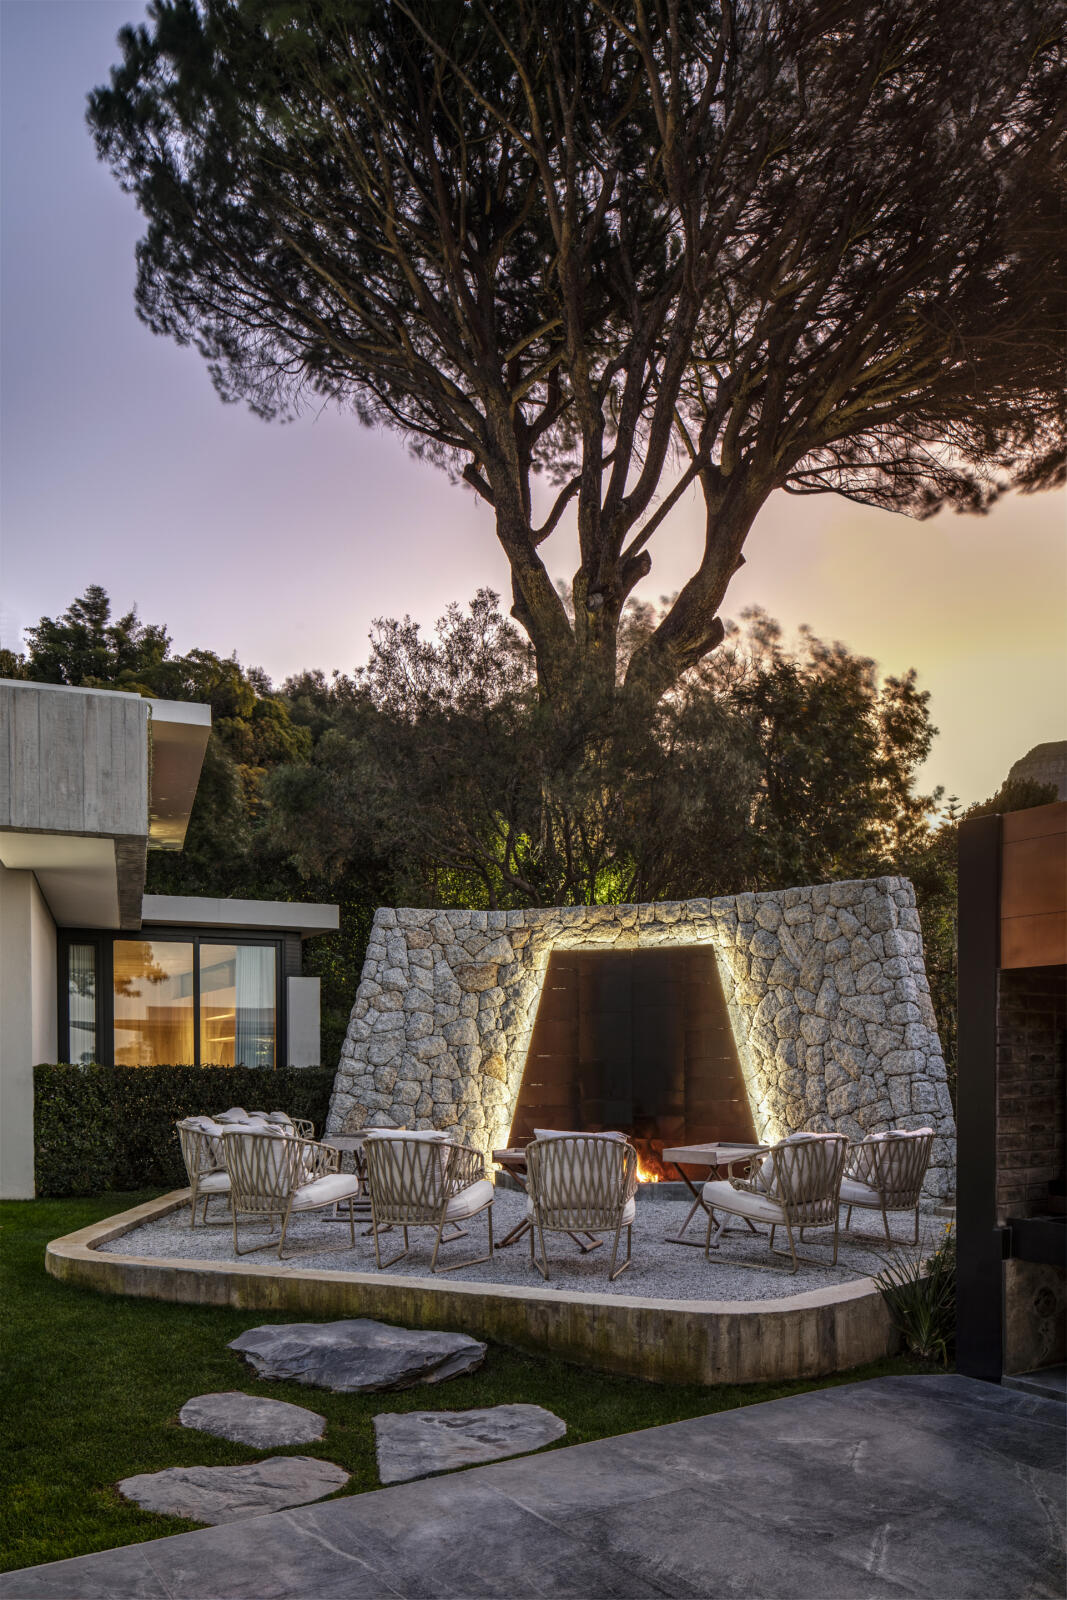 A Glen Villa with a Contemporary Design featuring Nature's Splendor in a modern home with a fire pit in the backyard.